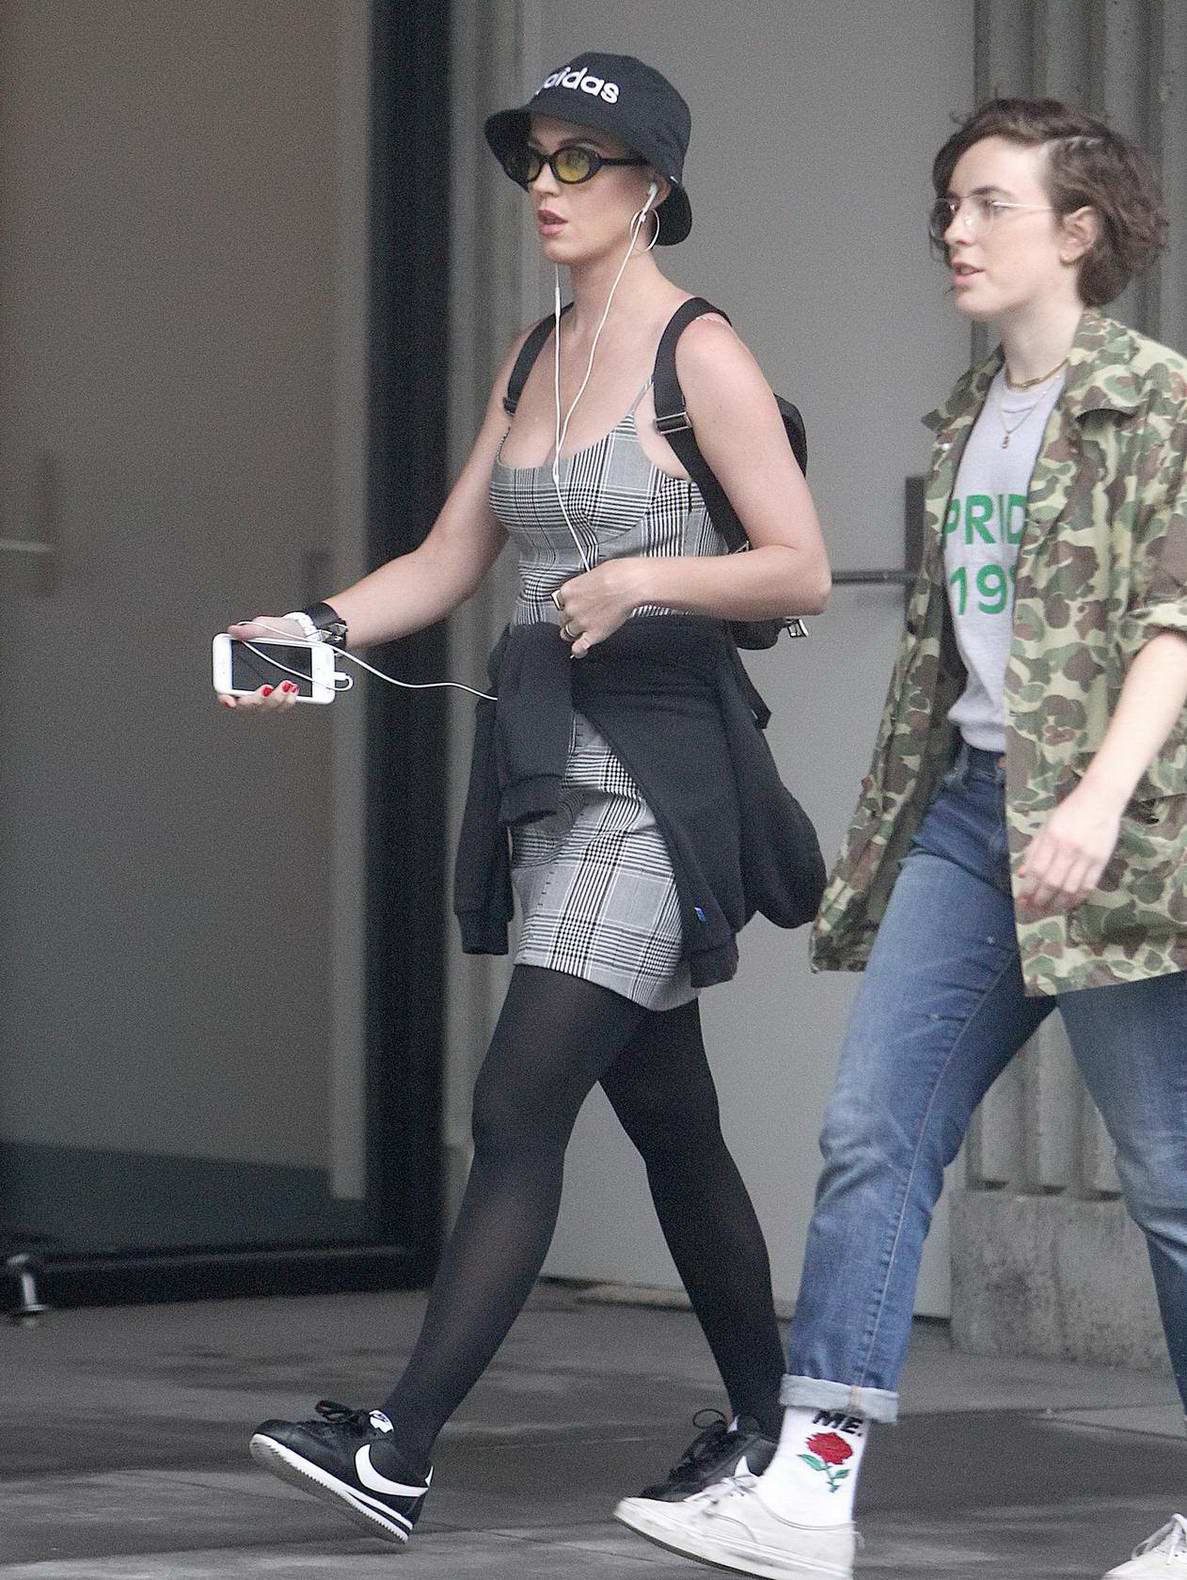 Lily Collins seen wearing a pink jacket and black leggings while filming  scenes for 'Emily in